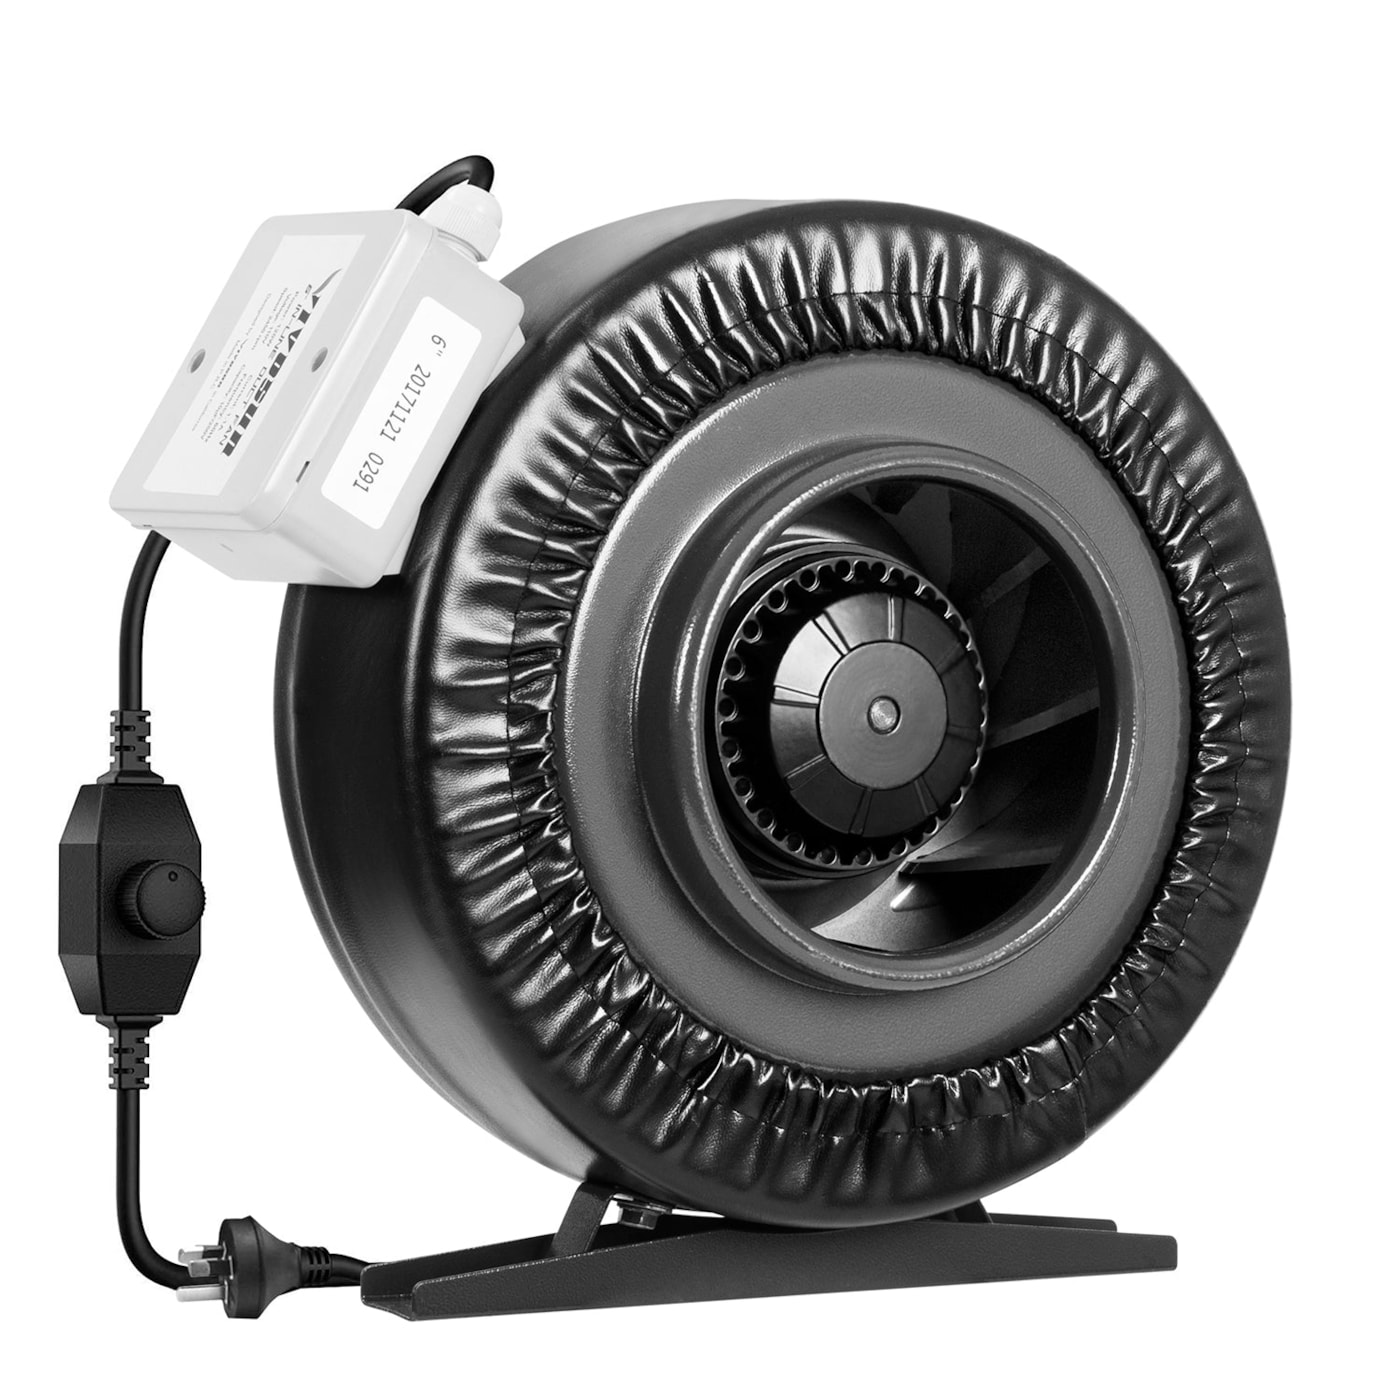 VIVOSUN 6-Inch 440 CFM Inline Duct Fan with Variable Speed Controller